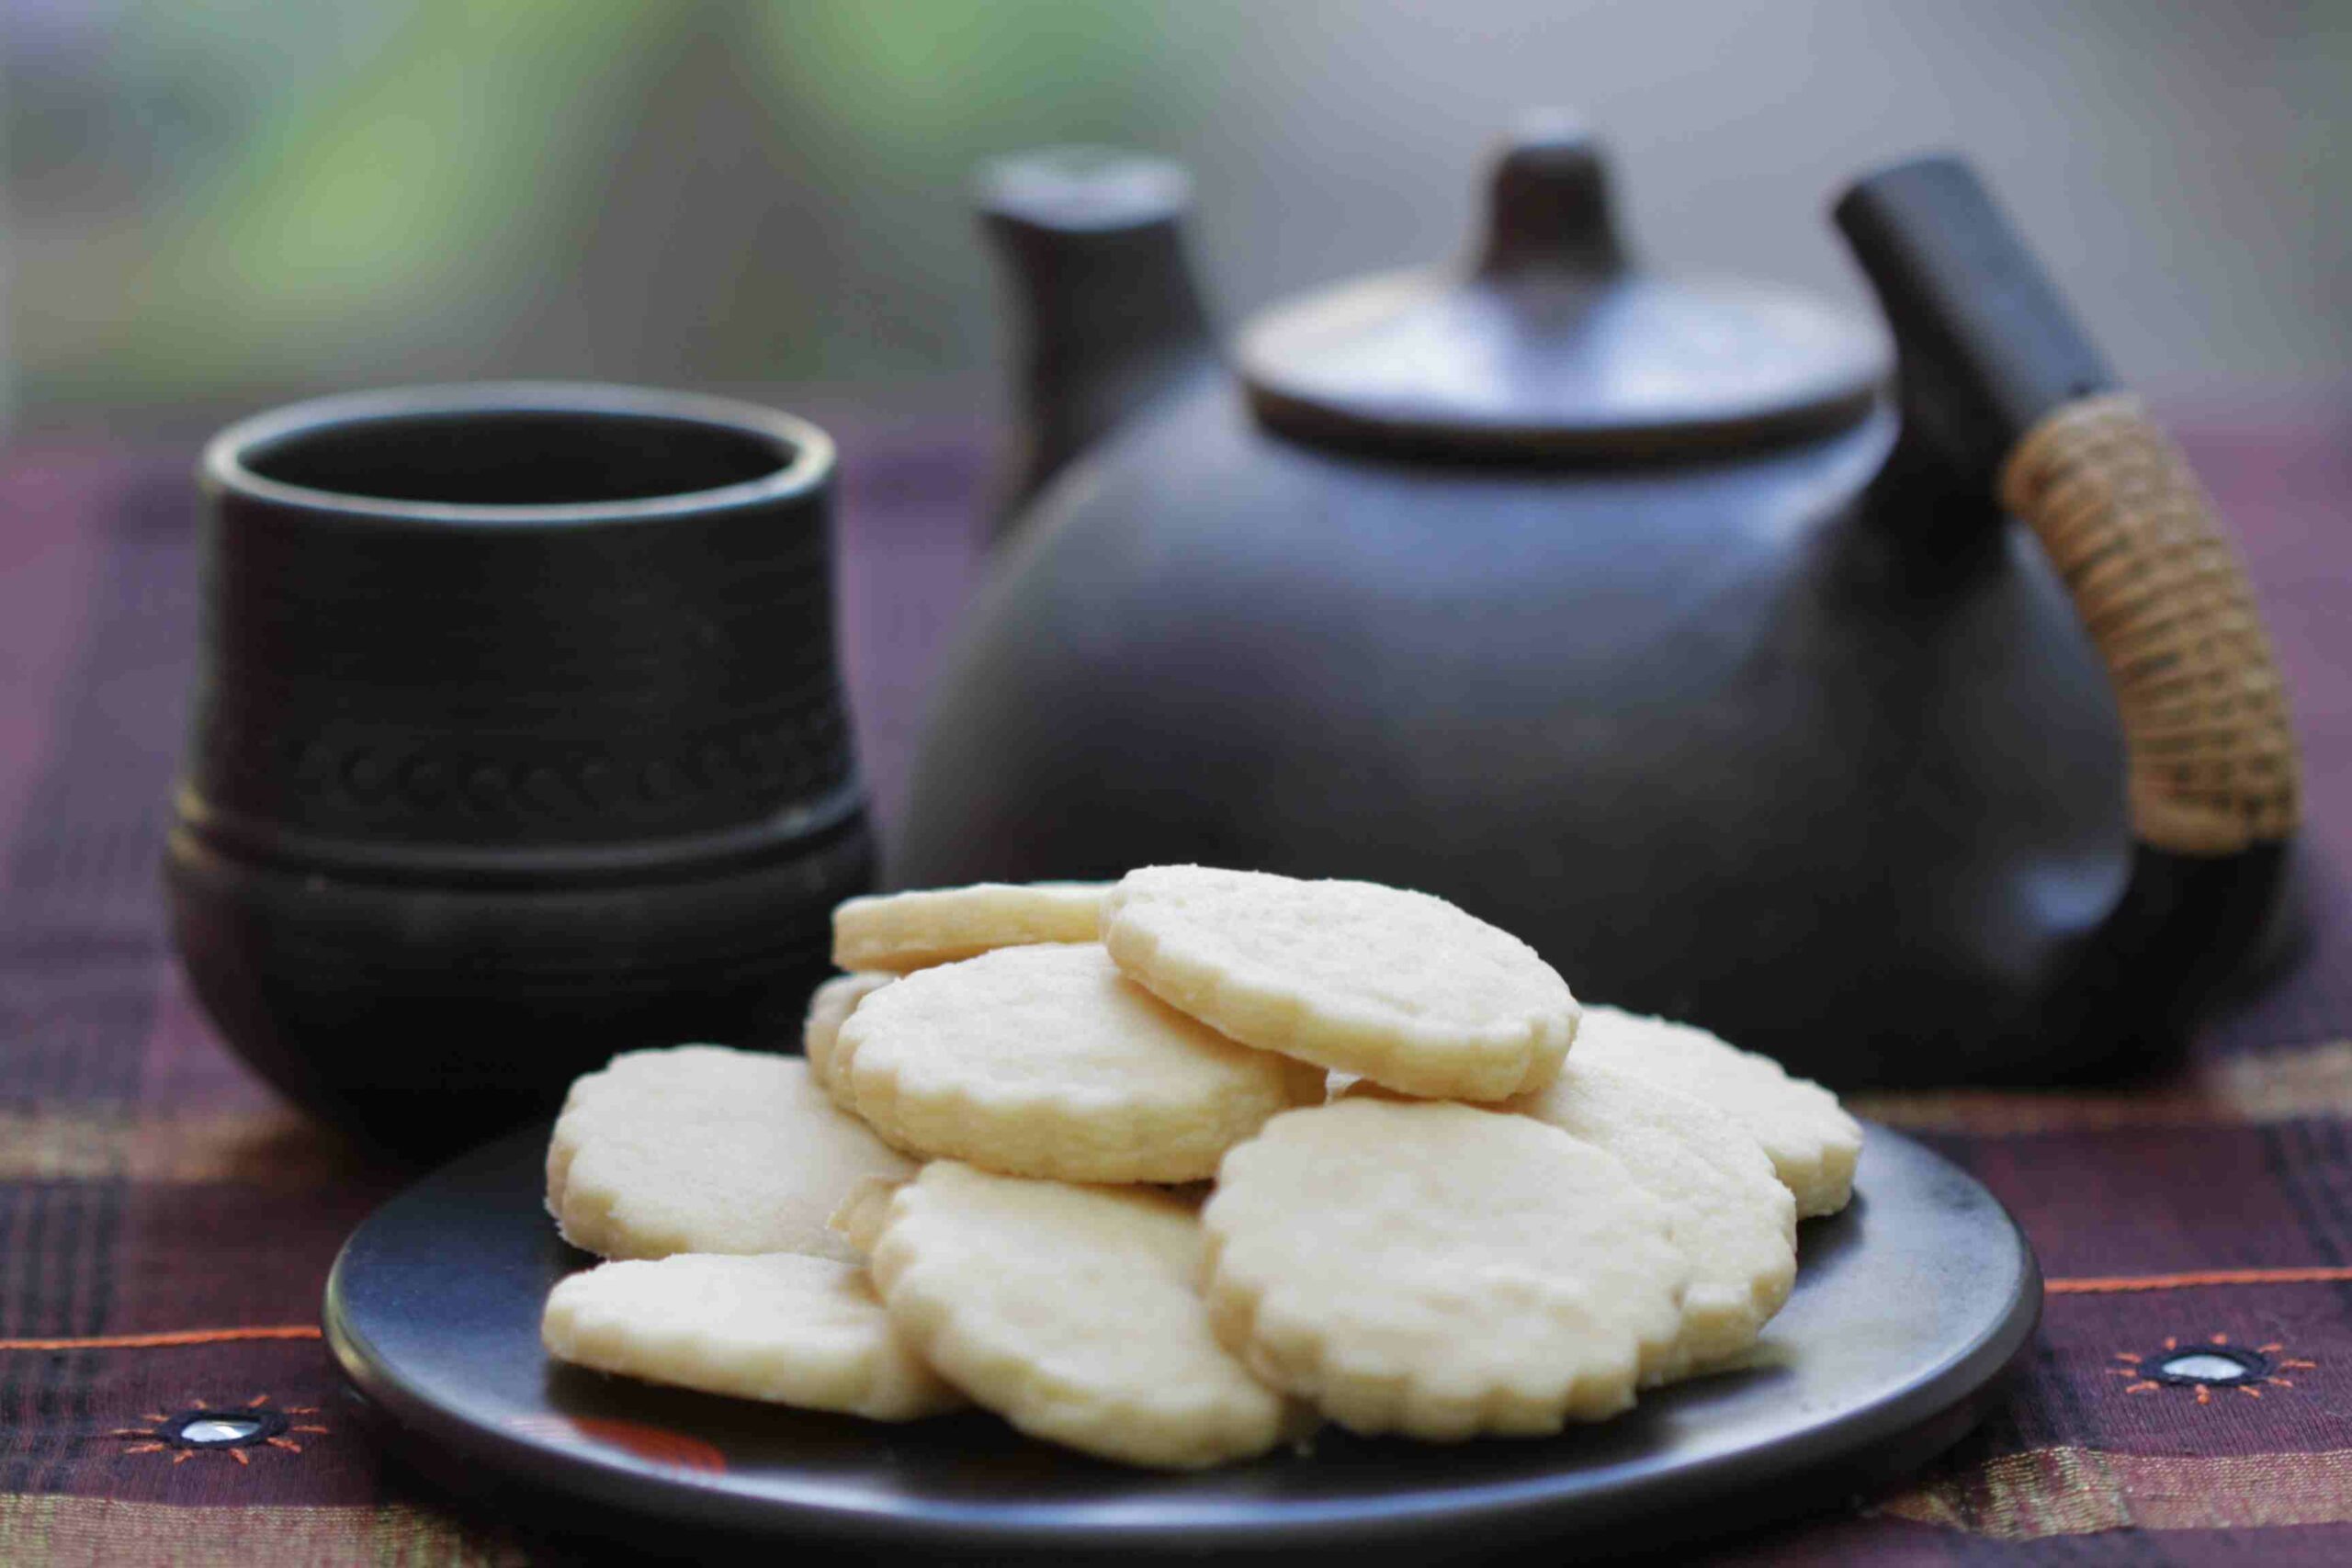 The chai biscuits prepared with Indian spices are a perfect accompaniment with tea